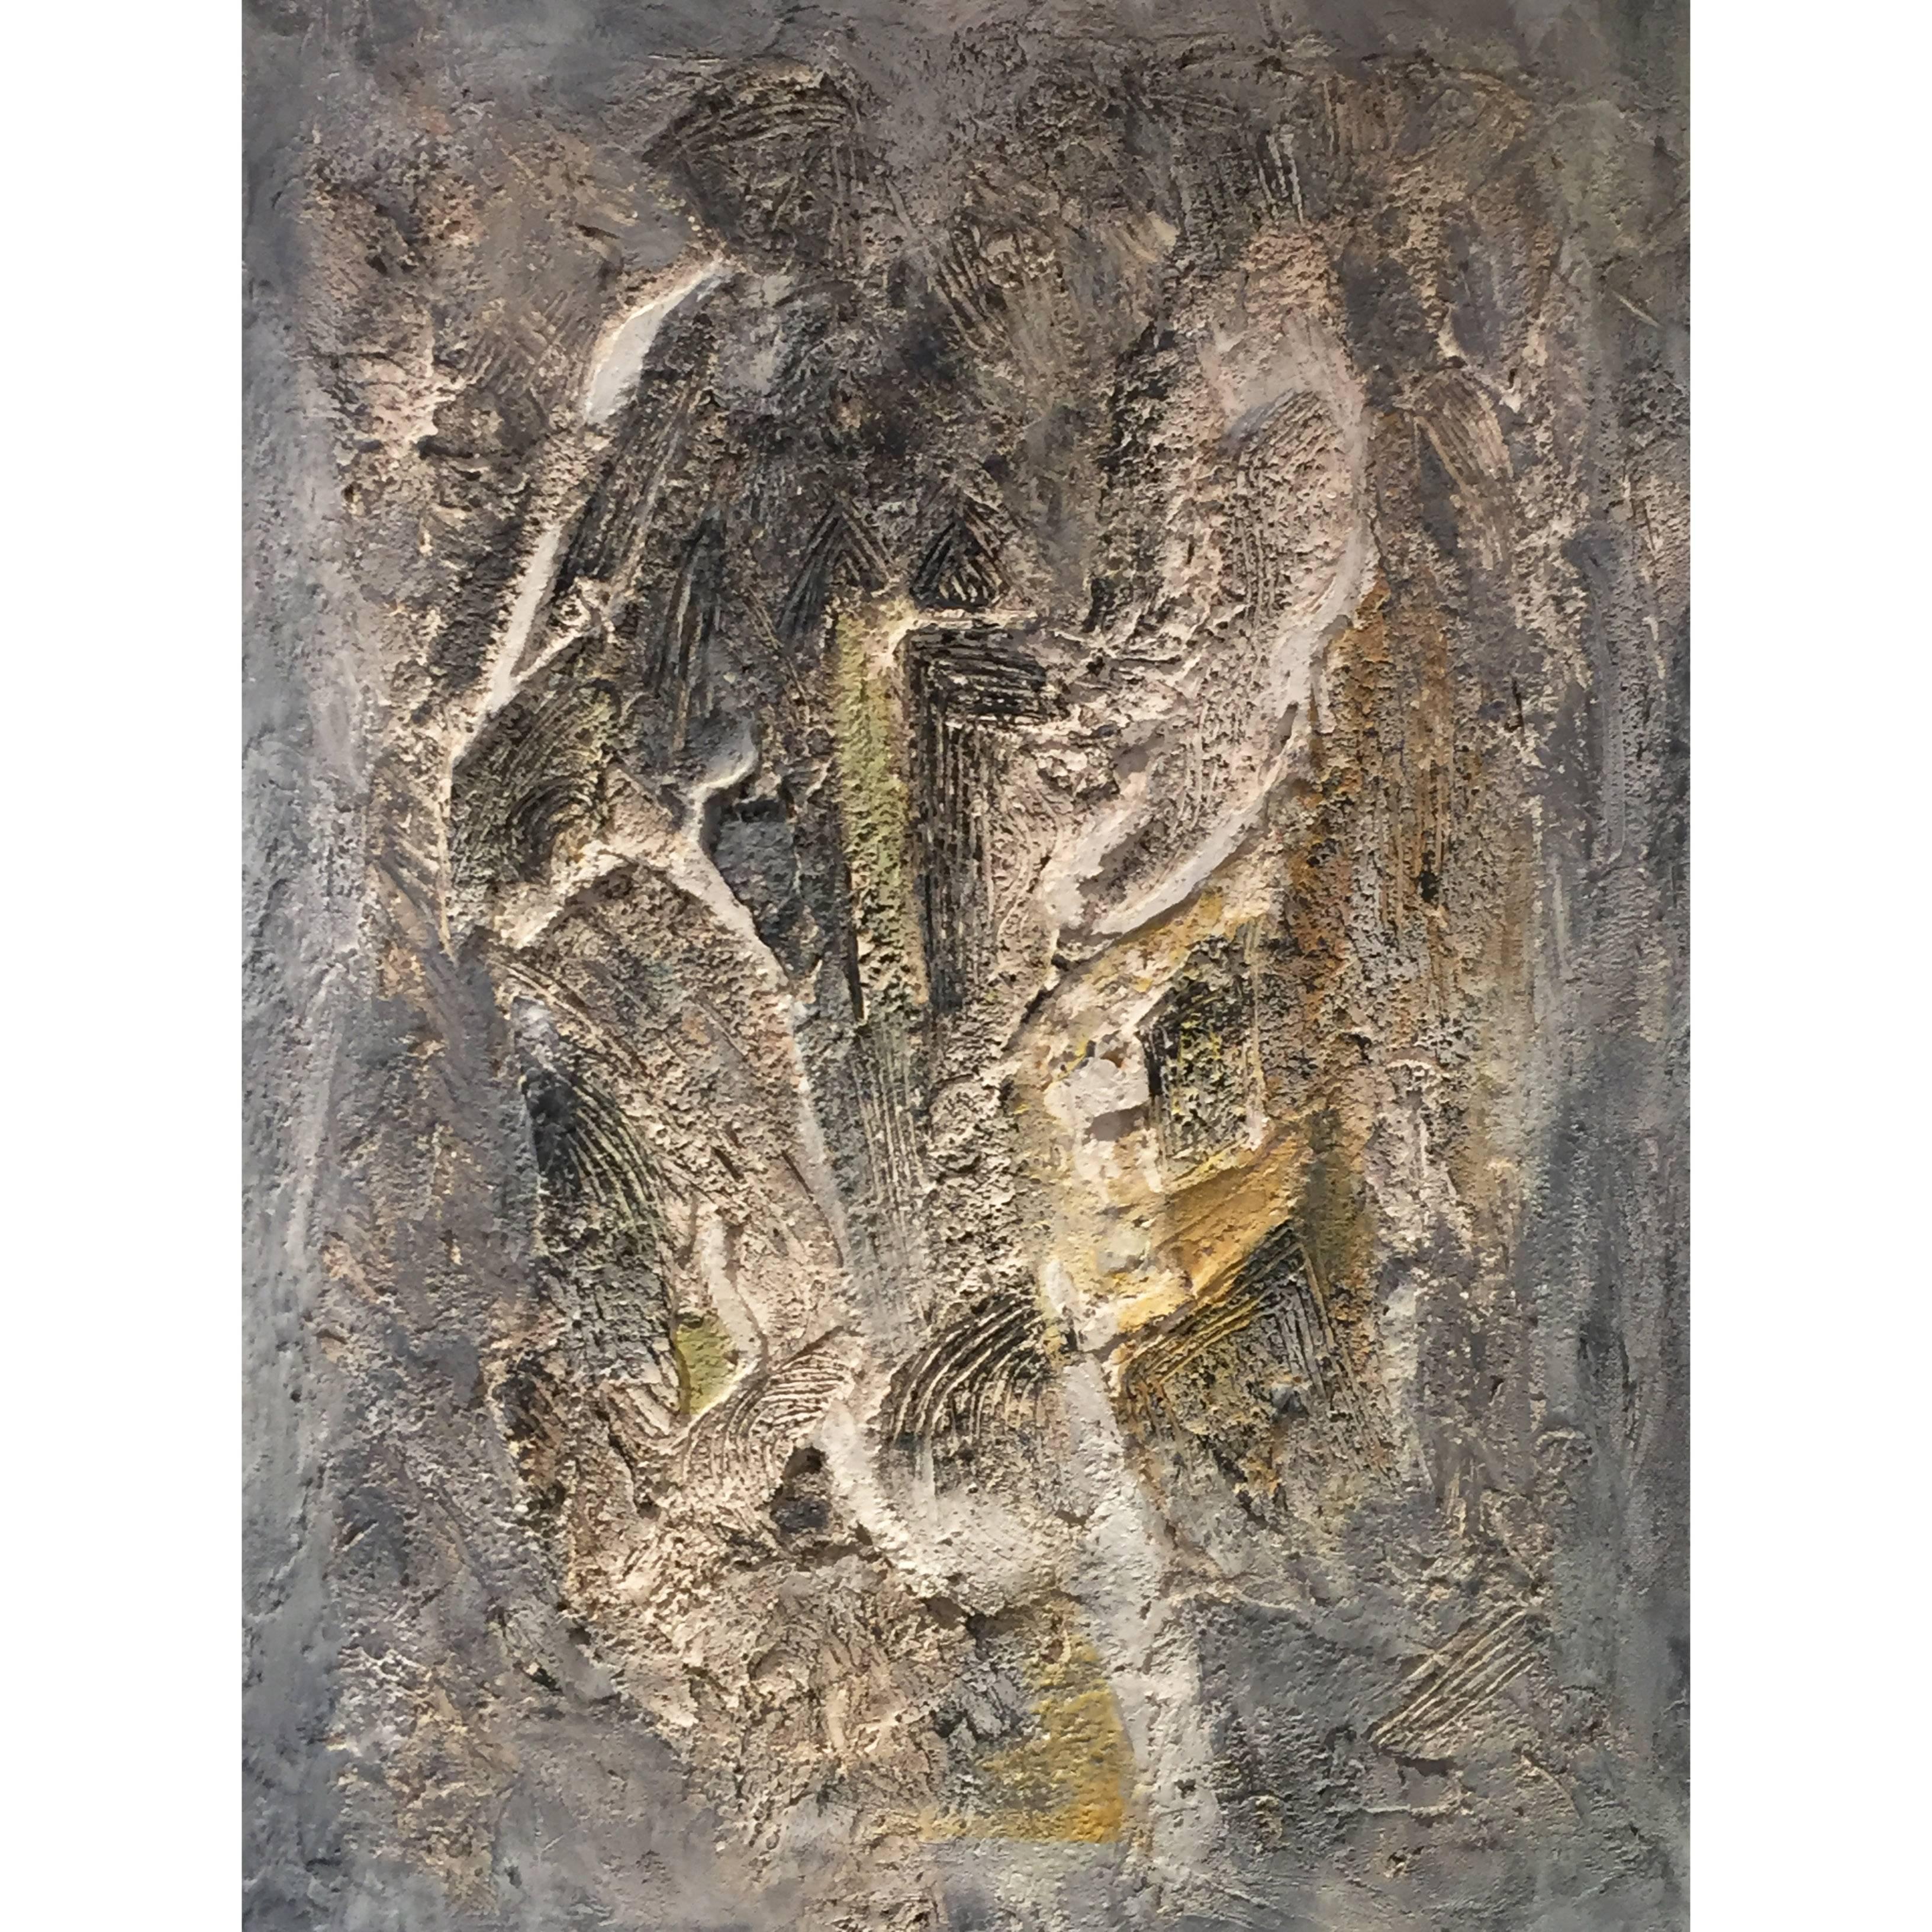 Abstract artwork by David Carr (British, 1915-1968) featuring a range of different elements and textures. Plaster and acrylic paint applied using palette knife in a mixed experimental way. Signed original artwork.